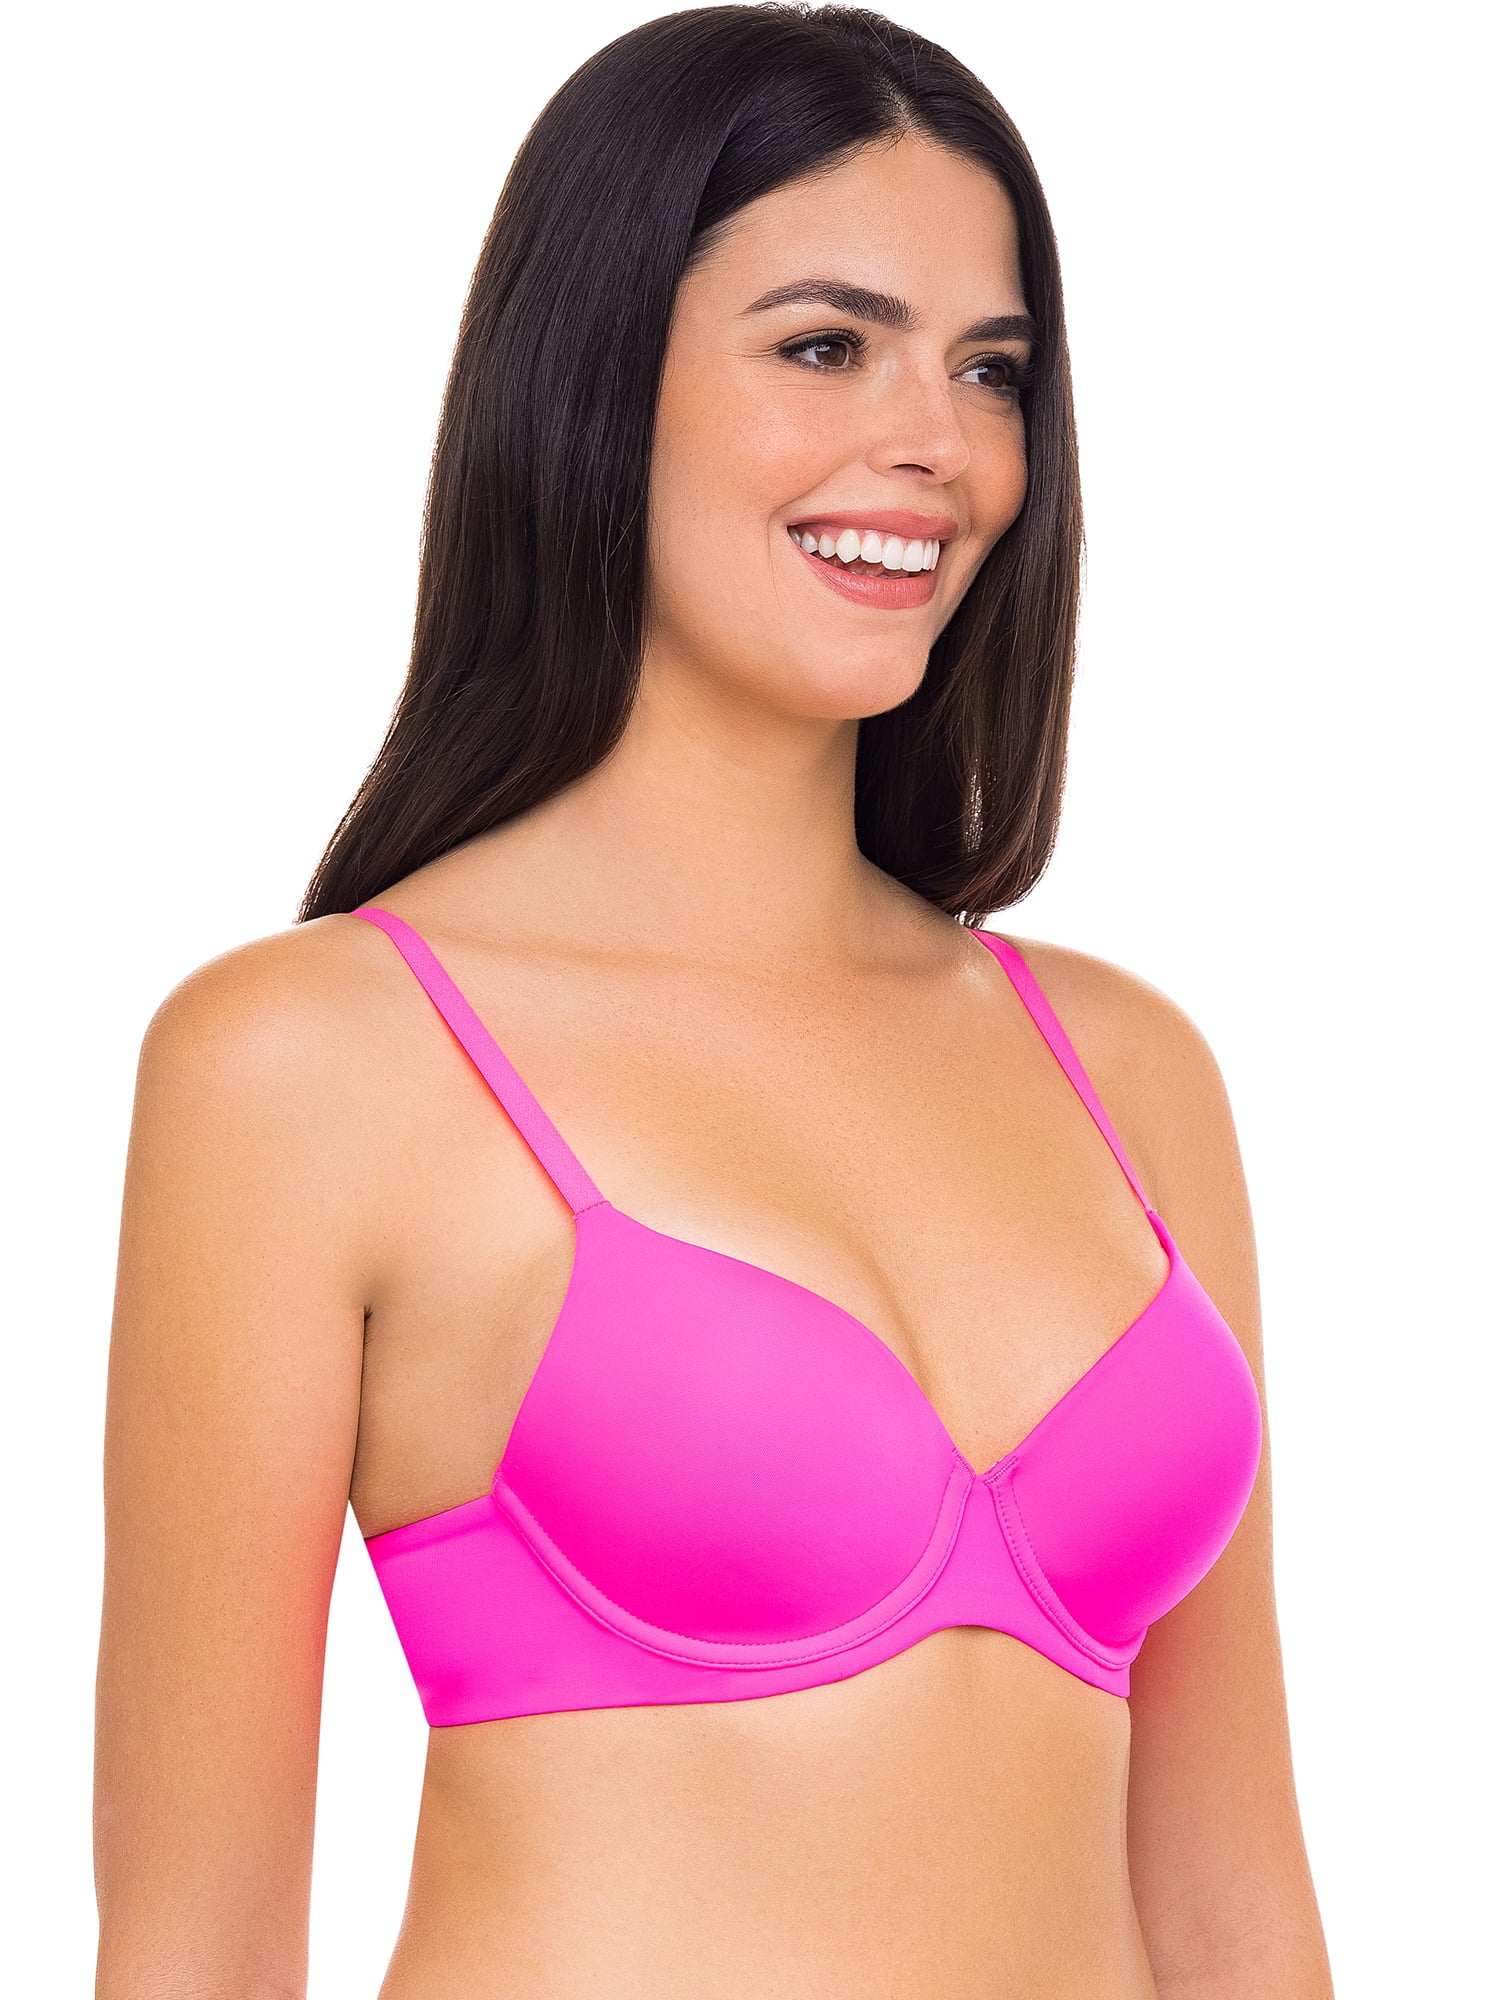 Kindly Yours Women’s Sustainable Tailored Full Coverage T-Shirt Bra, Sizes  34A-40DD